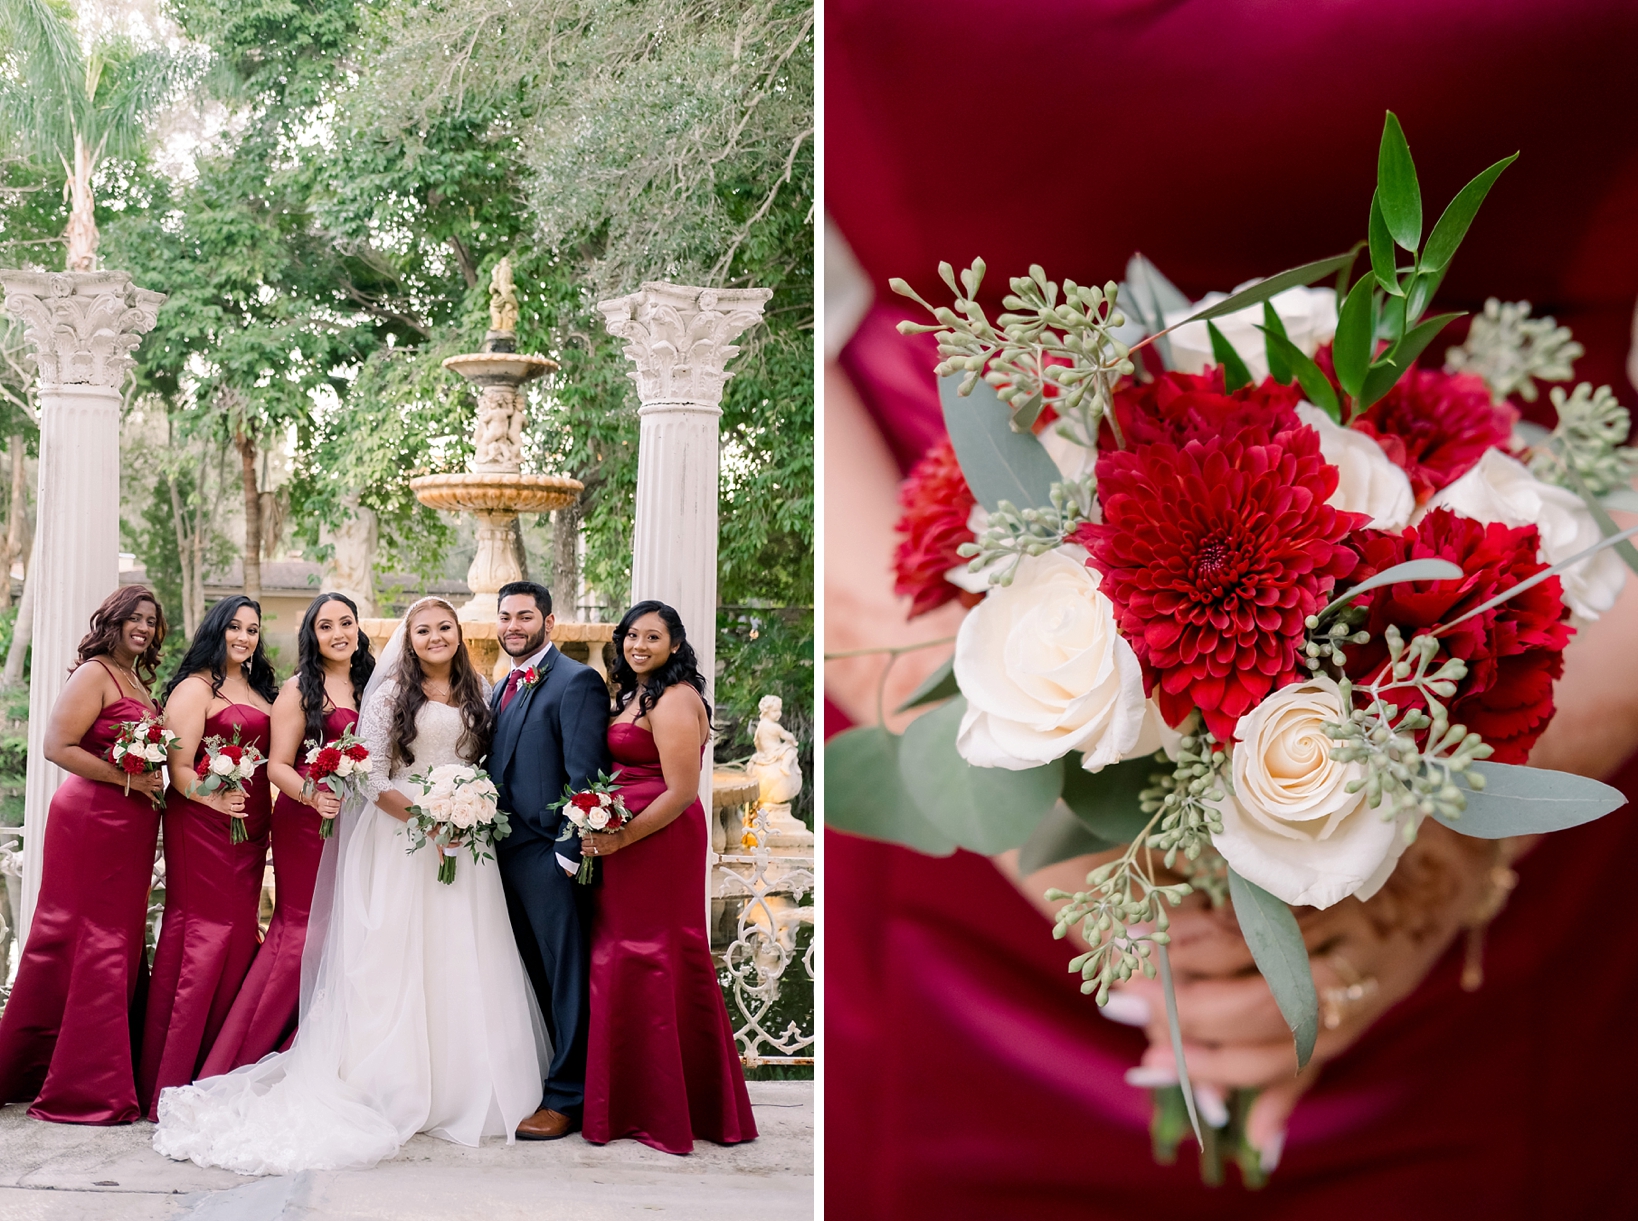 The Bridal party and a floral detail by Sarah & Ben Photography